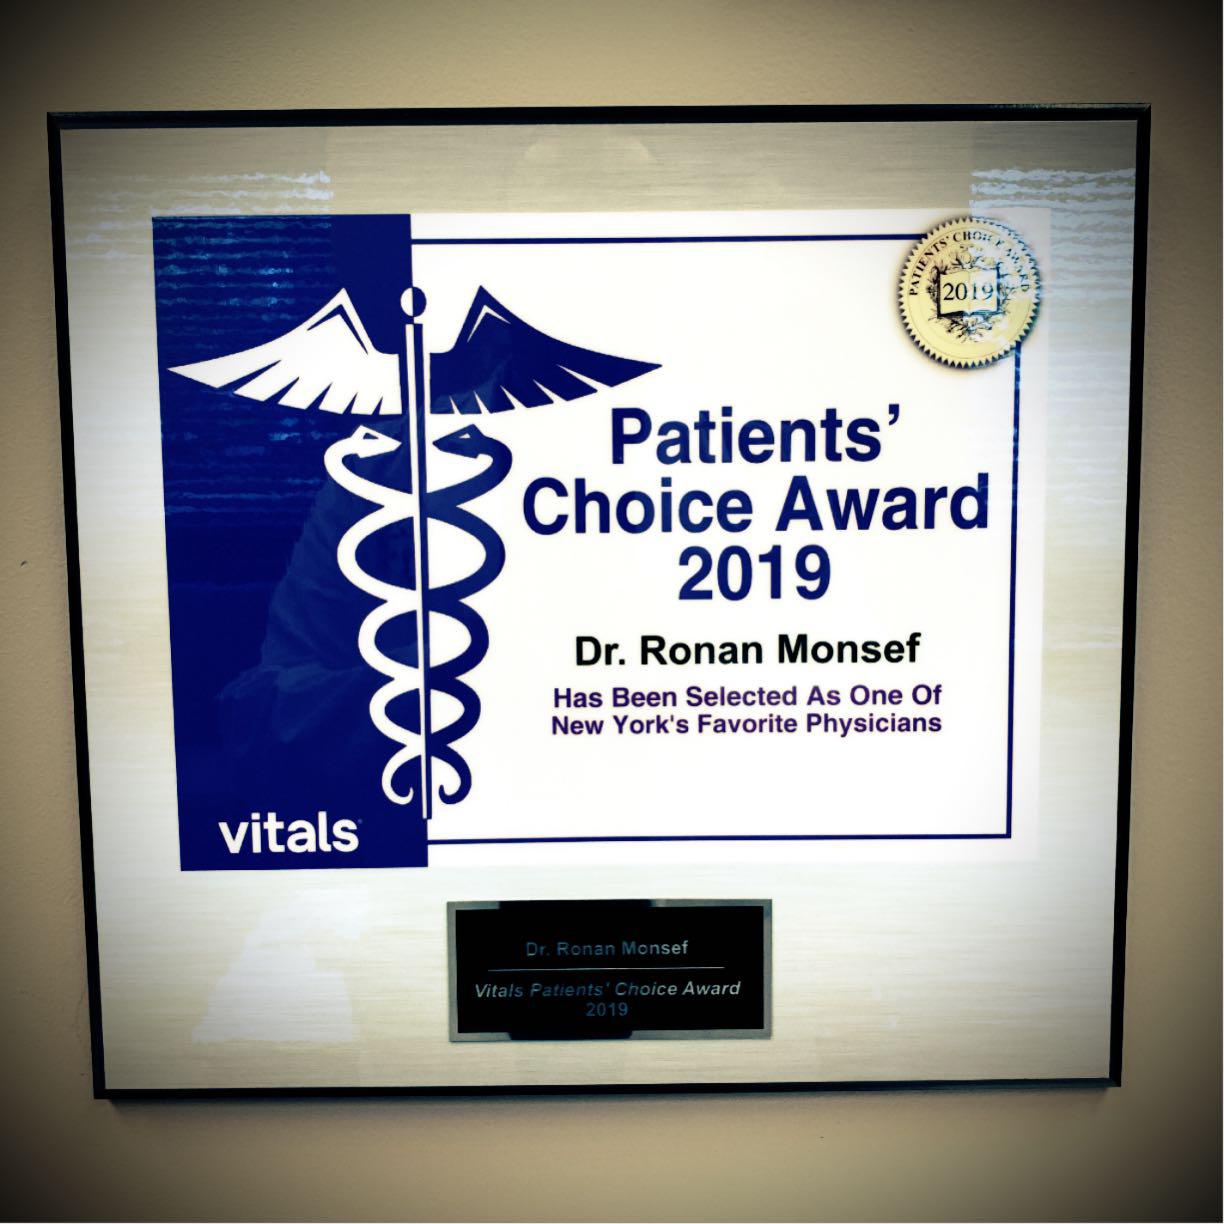 The highest honor a doctor can receive is one bestowed on him by his patients. I'm humbled and truly honored. Thank you to all my wonderful patients.